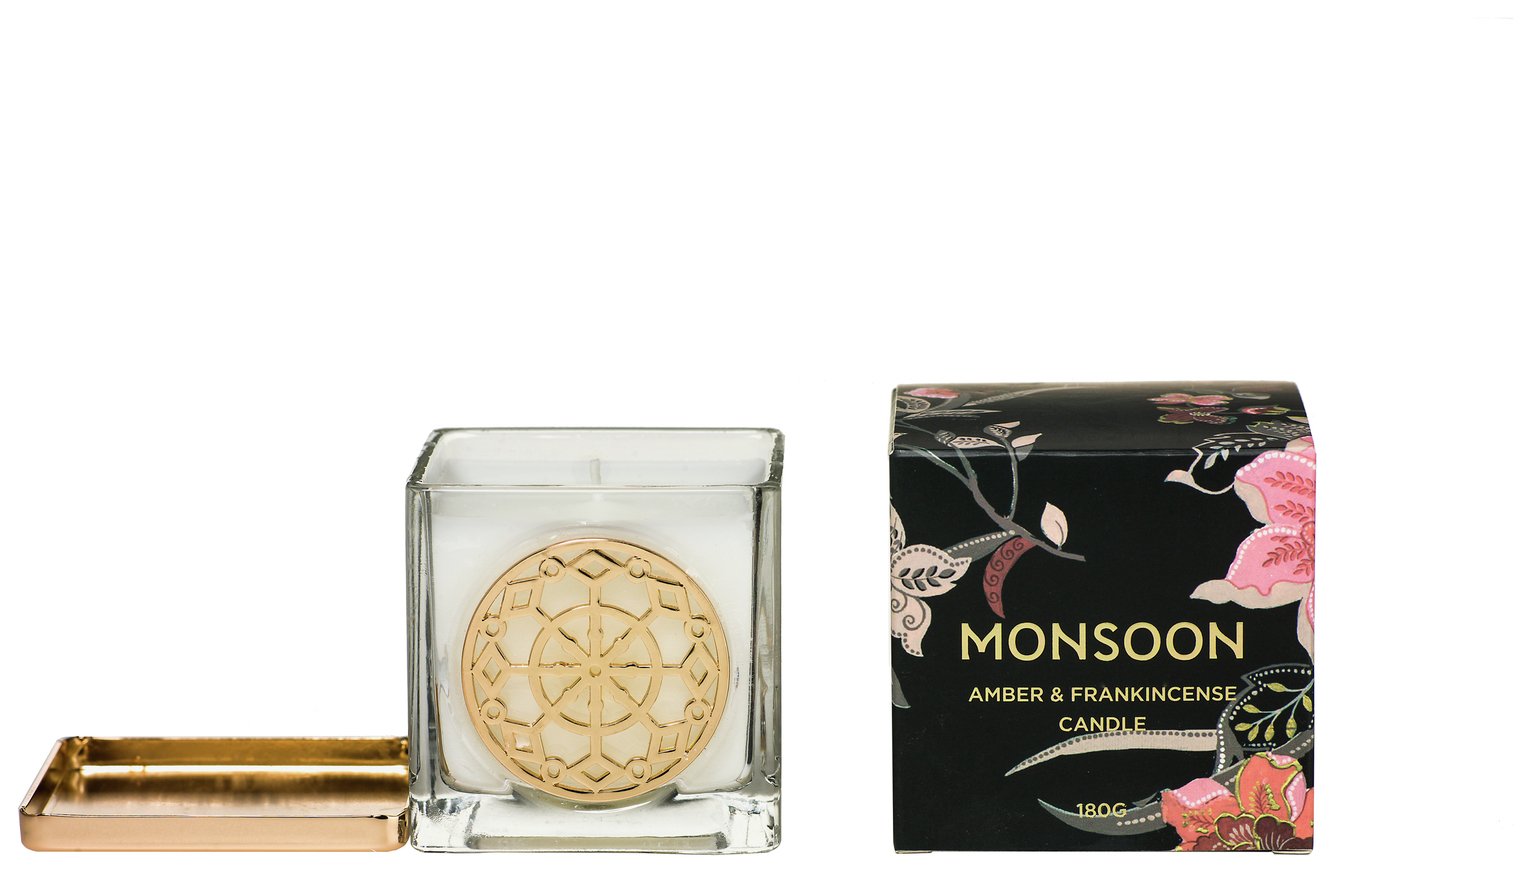 Monsoon Candle - Amber & Frankincense